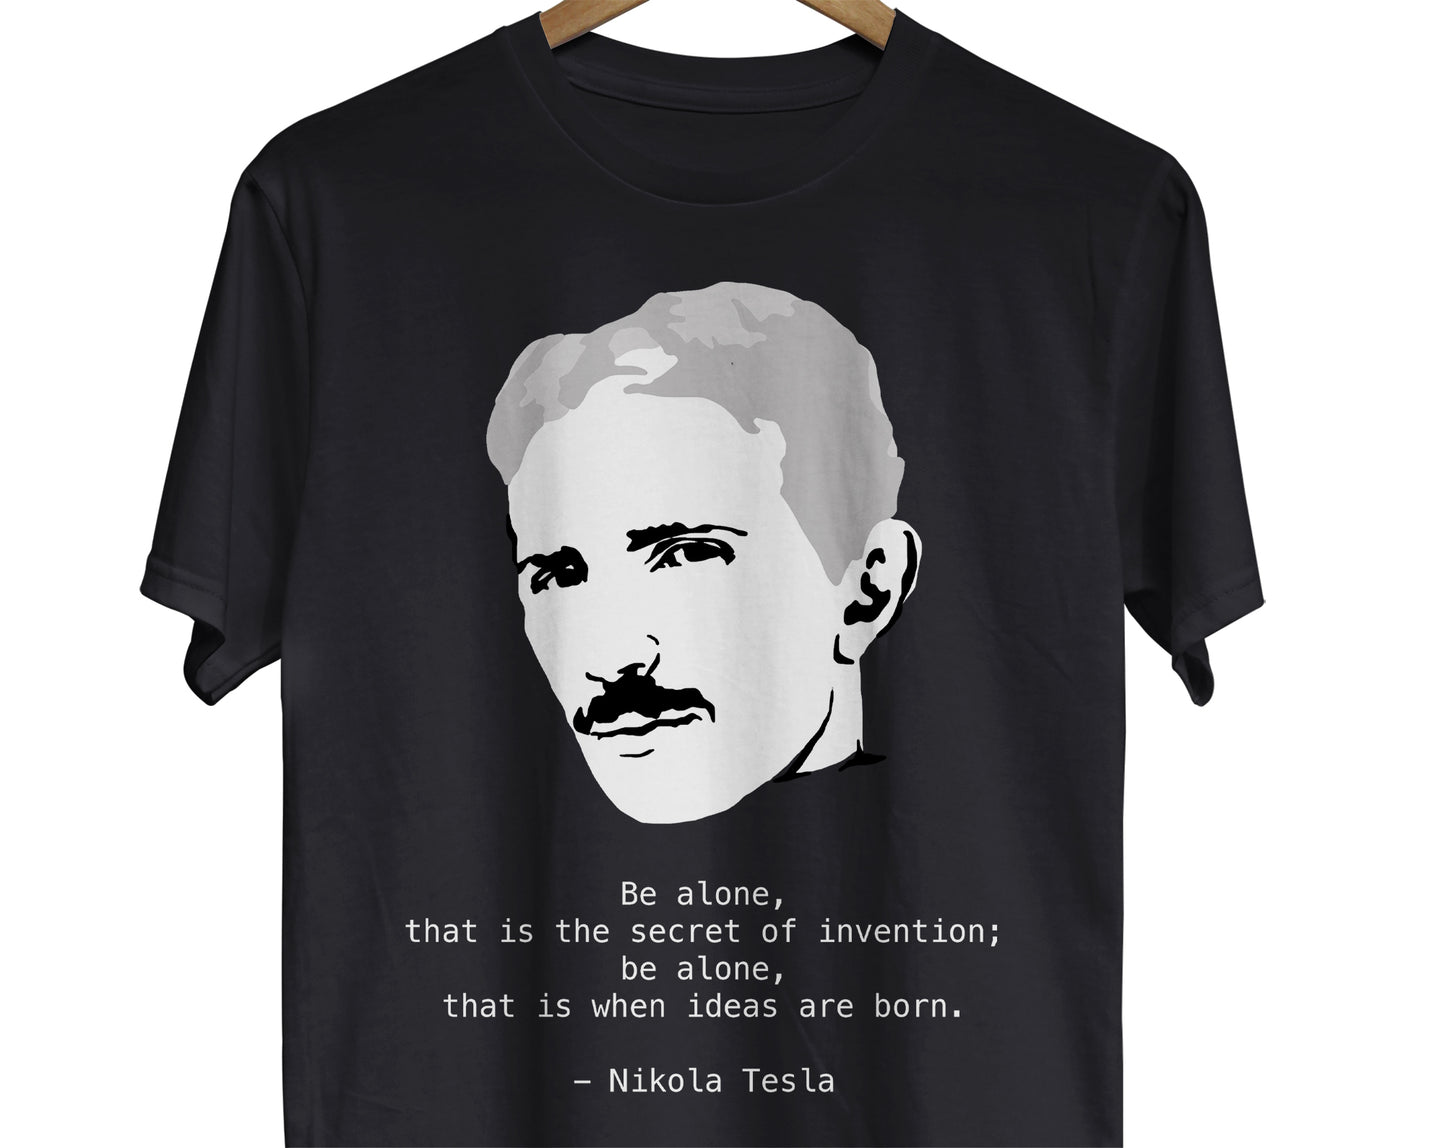 A t-shirt with a minimalist portrait of scientist Nikola Tesla with his introvert quote: Be alone, that is the secret of invention, that is where ideas are born.